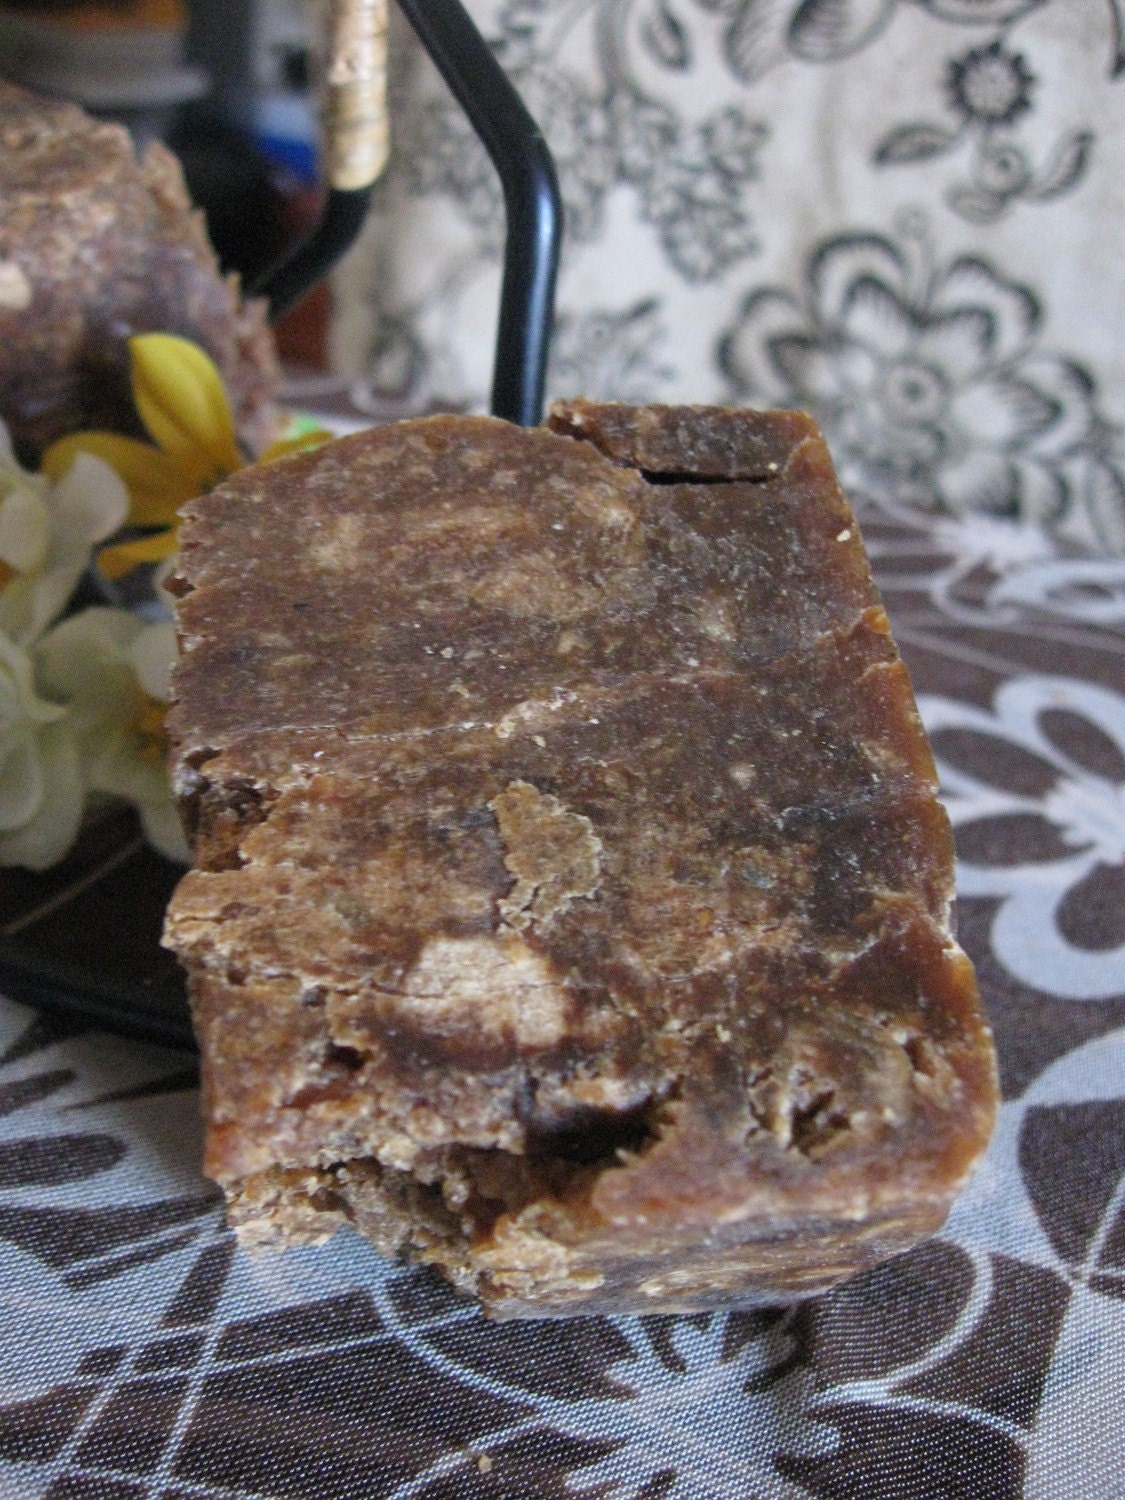 Pure Black Soap...  Authentic  ORGANIC  Handmade  ... Brighten COMPLEXION and Minimize CHEMICALS without Irritating Sensitive Skin